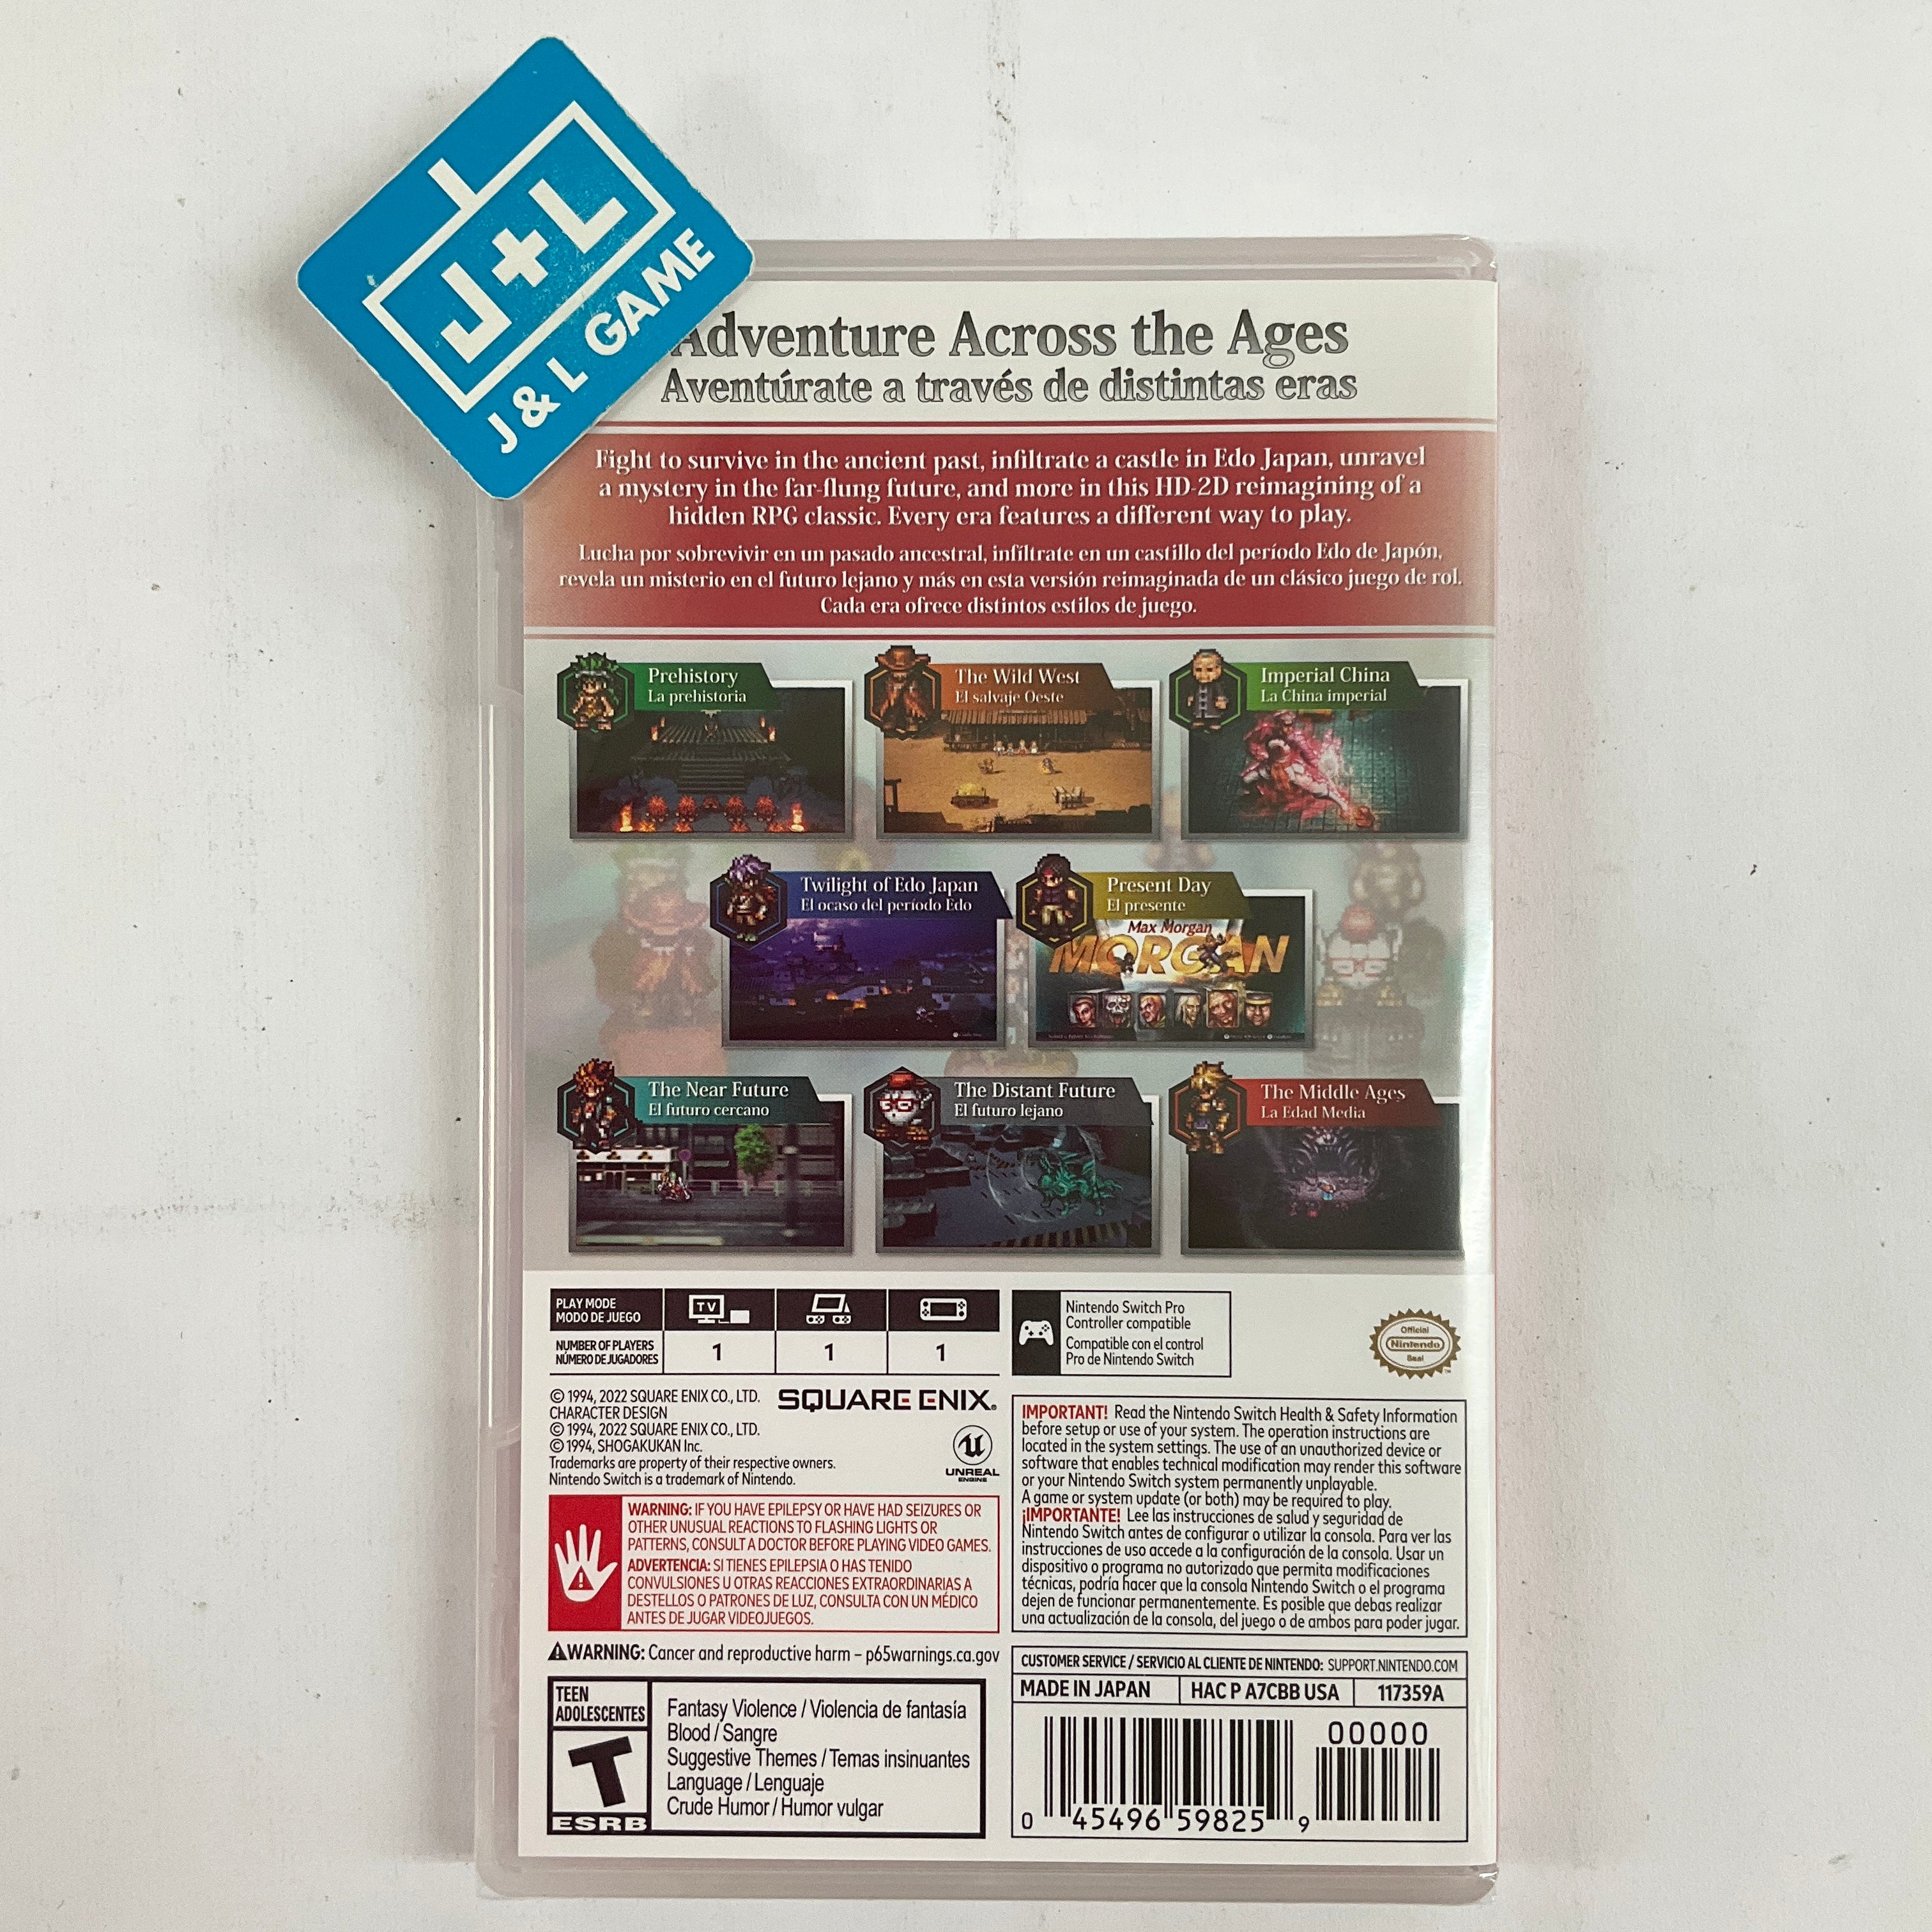 LIVE A LIVE - (NSW) Nintendo Switch Video Games Square Enix   